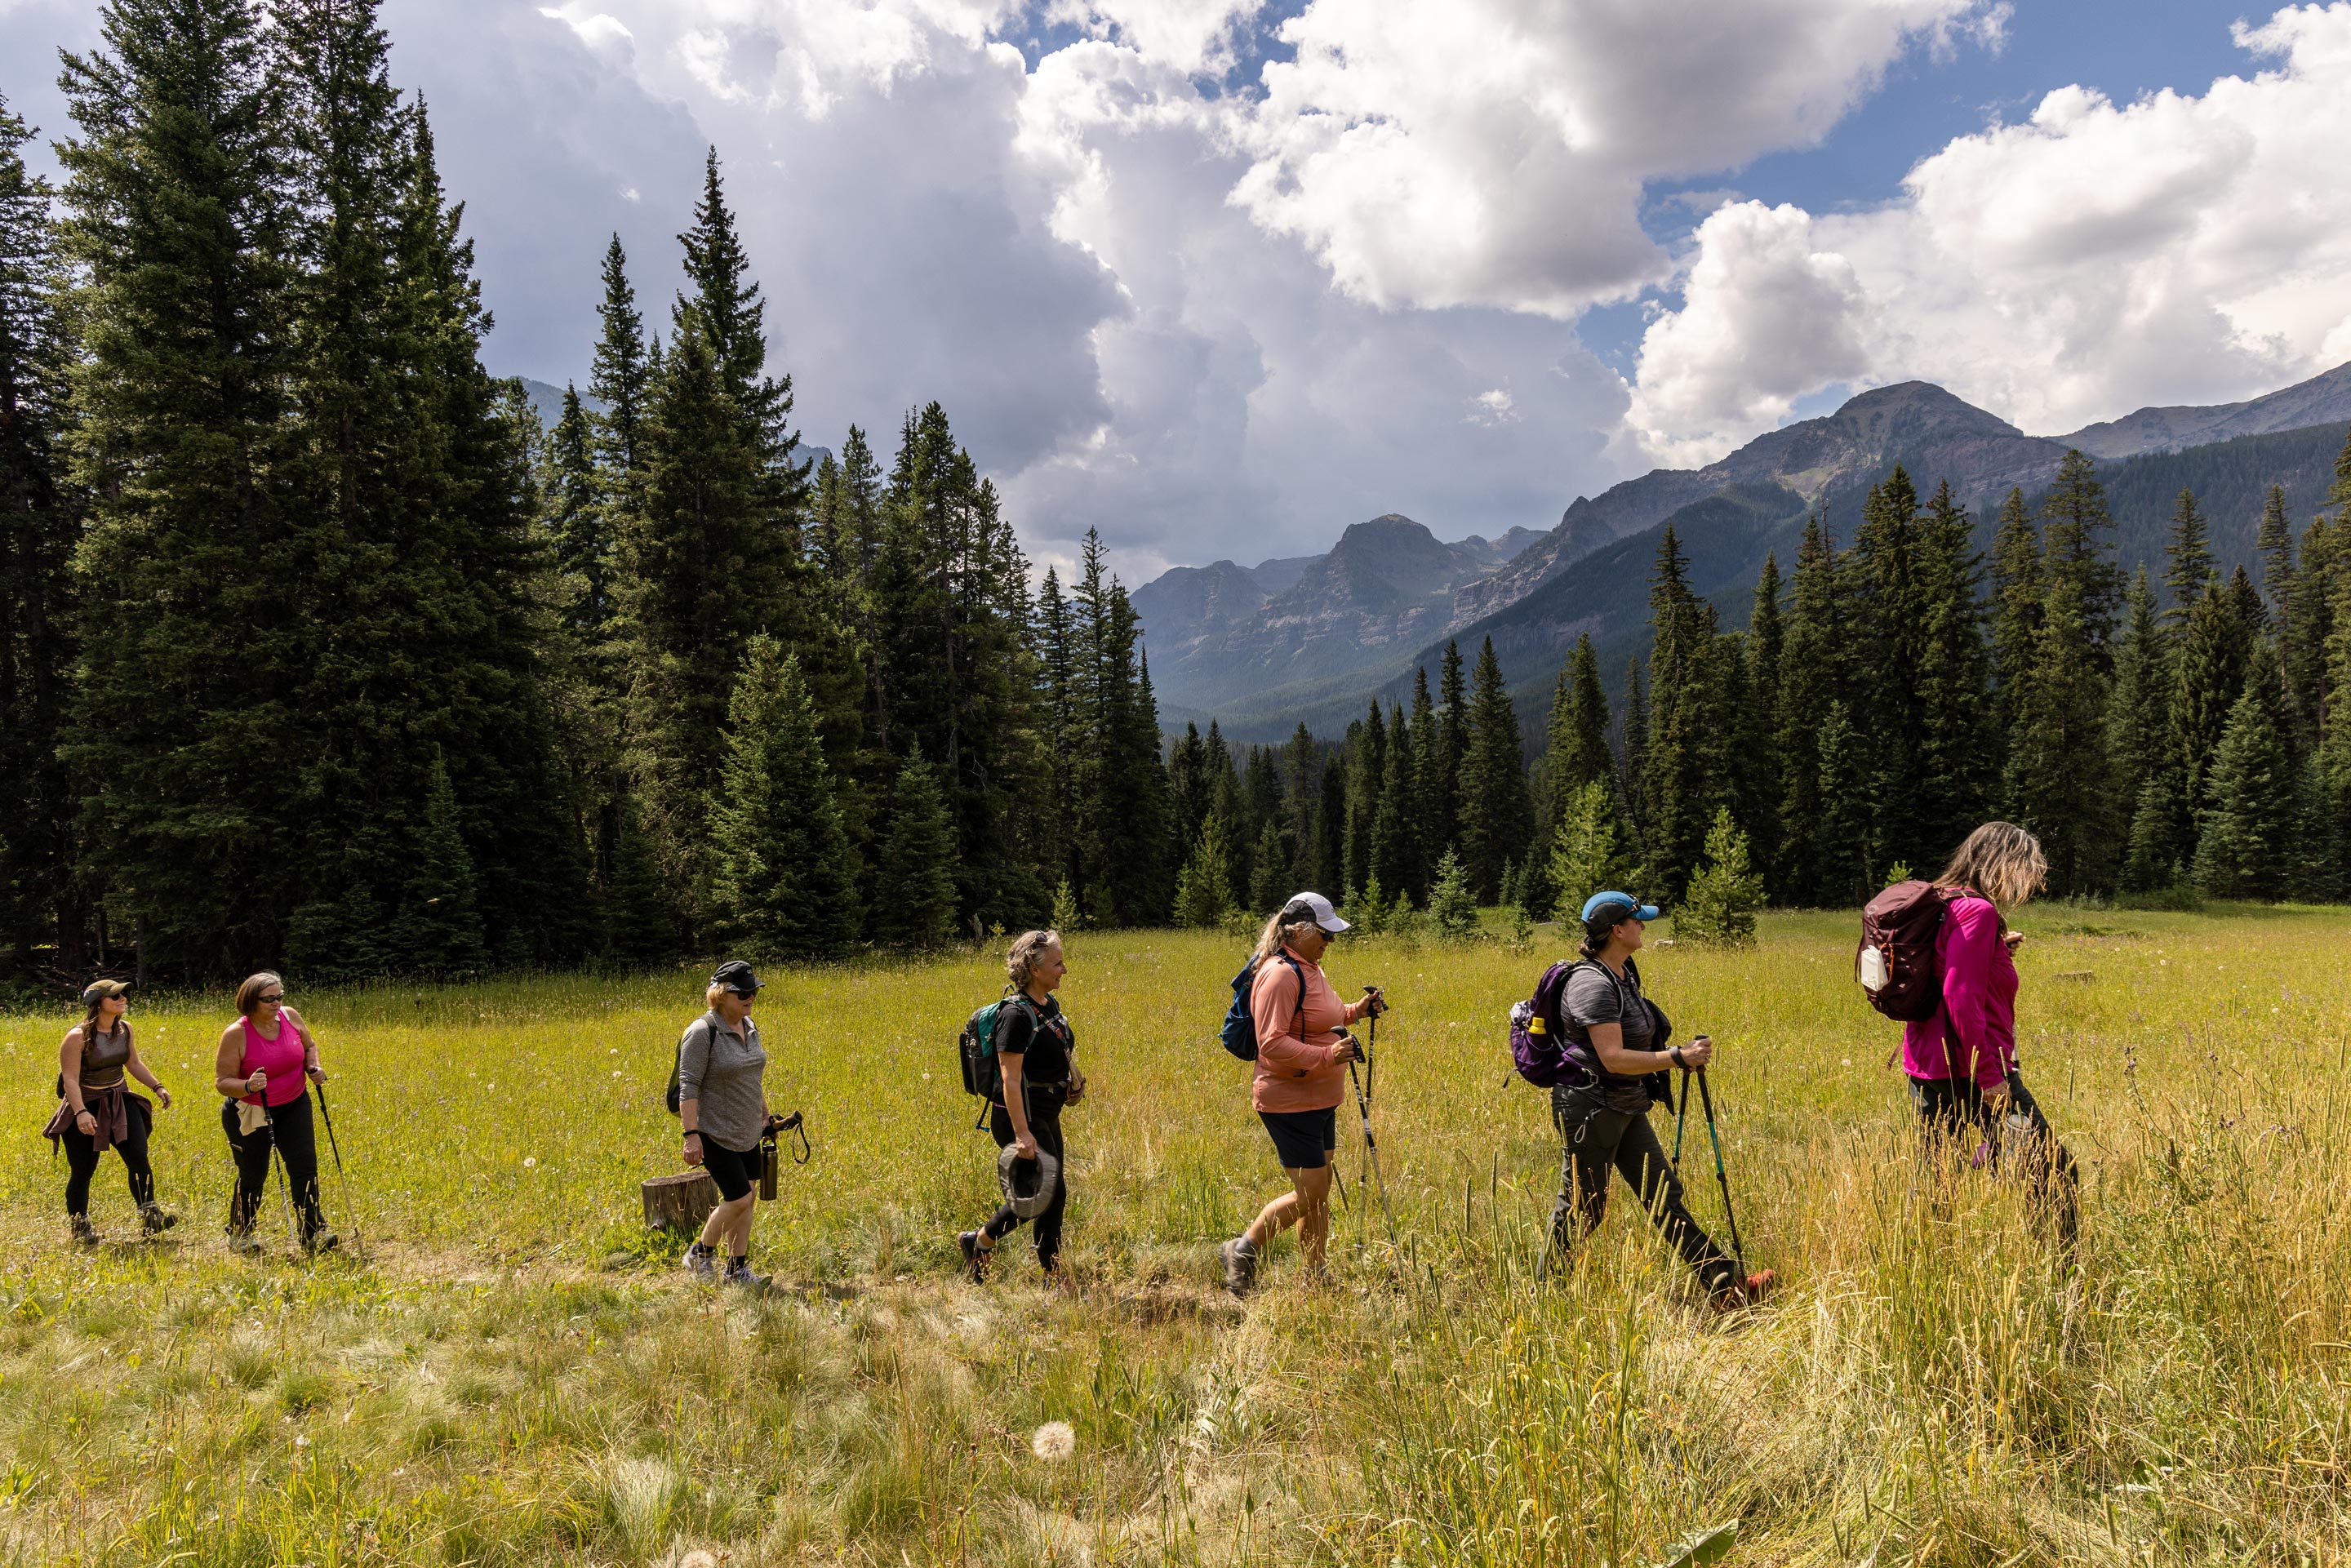 The women of the 52 Hike Challenge, hike through a meadow in Montana's Hyalite Valley.